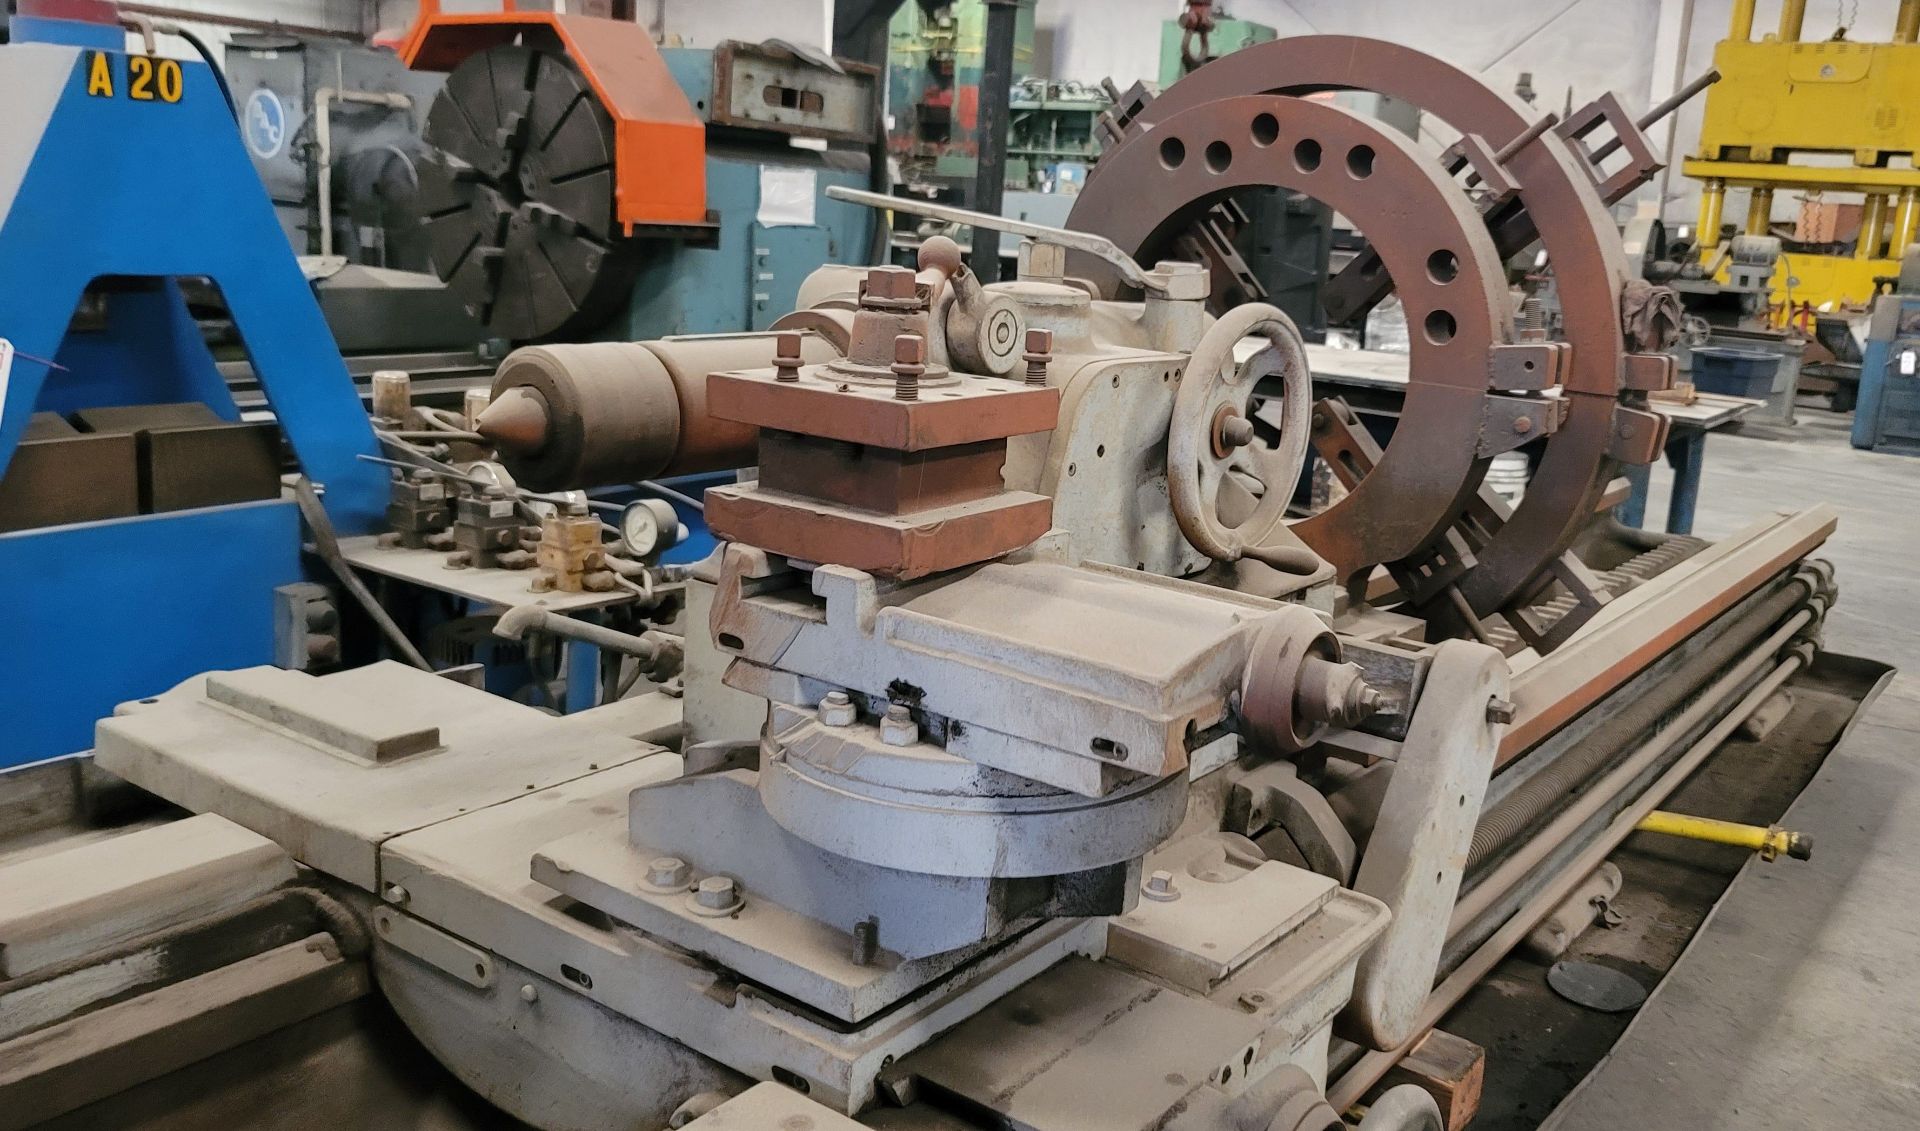 AXELSON A32 ENGINE LATHE, 32" X 168", 30" 4-JAW CHUCK, TAILSTOCK, (2) STEADY RESTS - Image 7 of 9